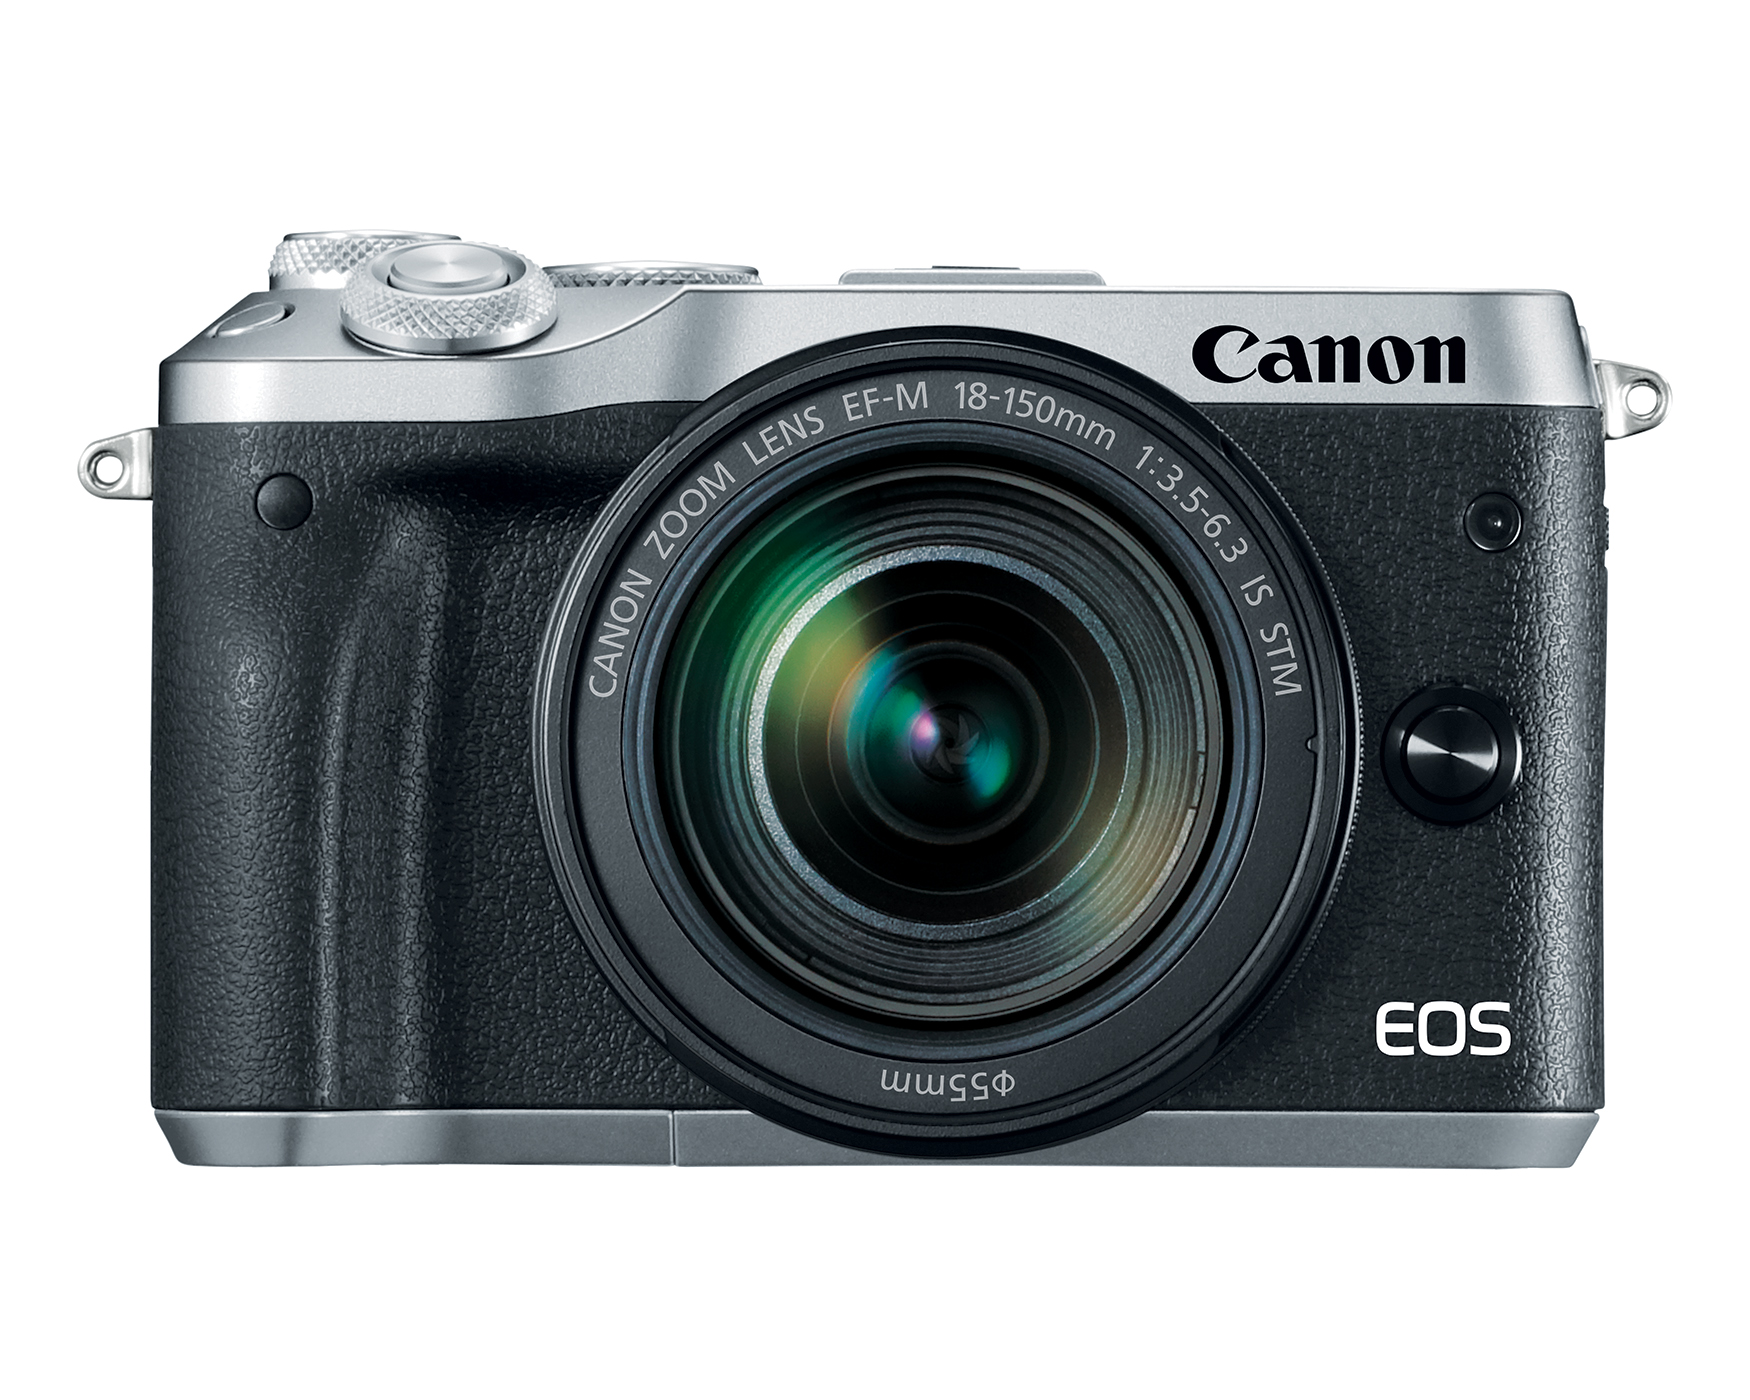 Canon EOS M6 Mirrorless Has Dual Pixel AF, In-Body Image Stabilization